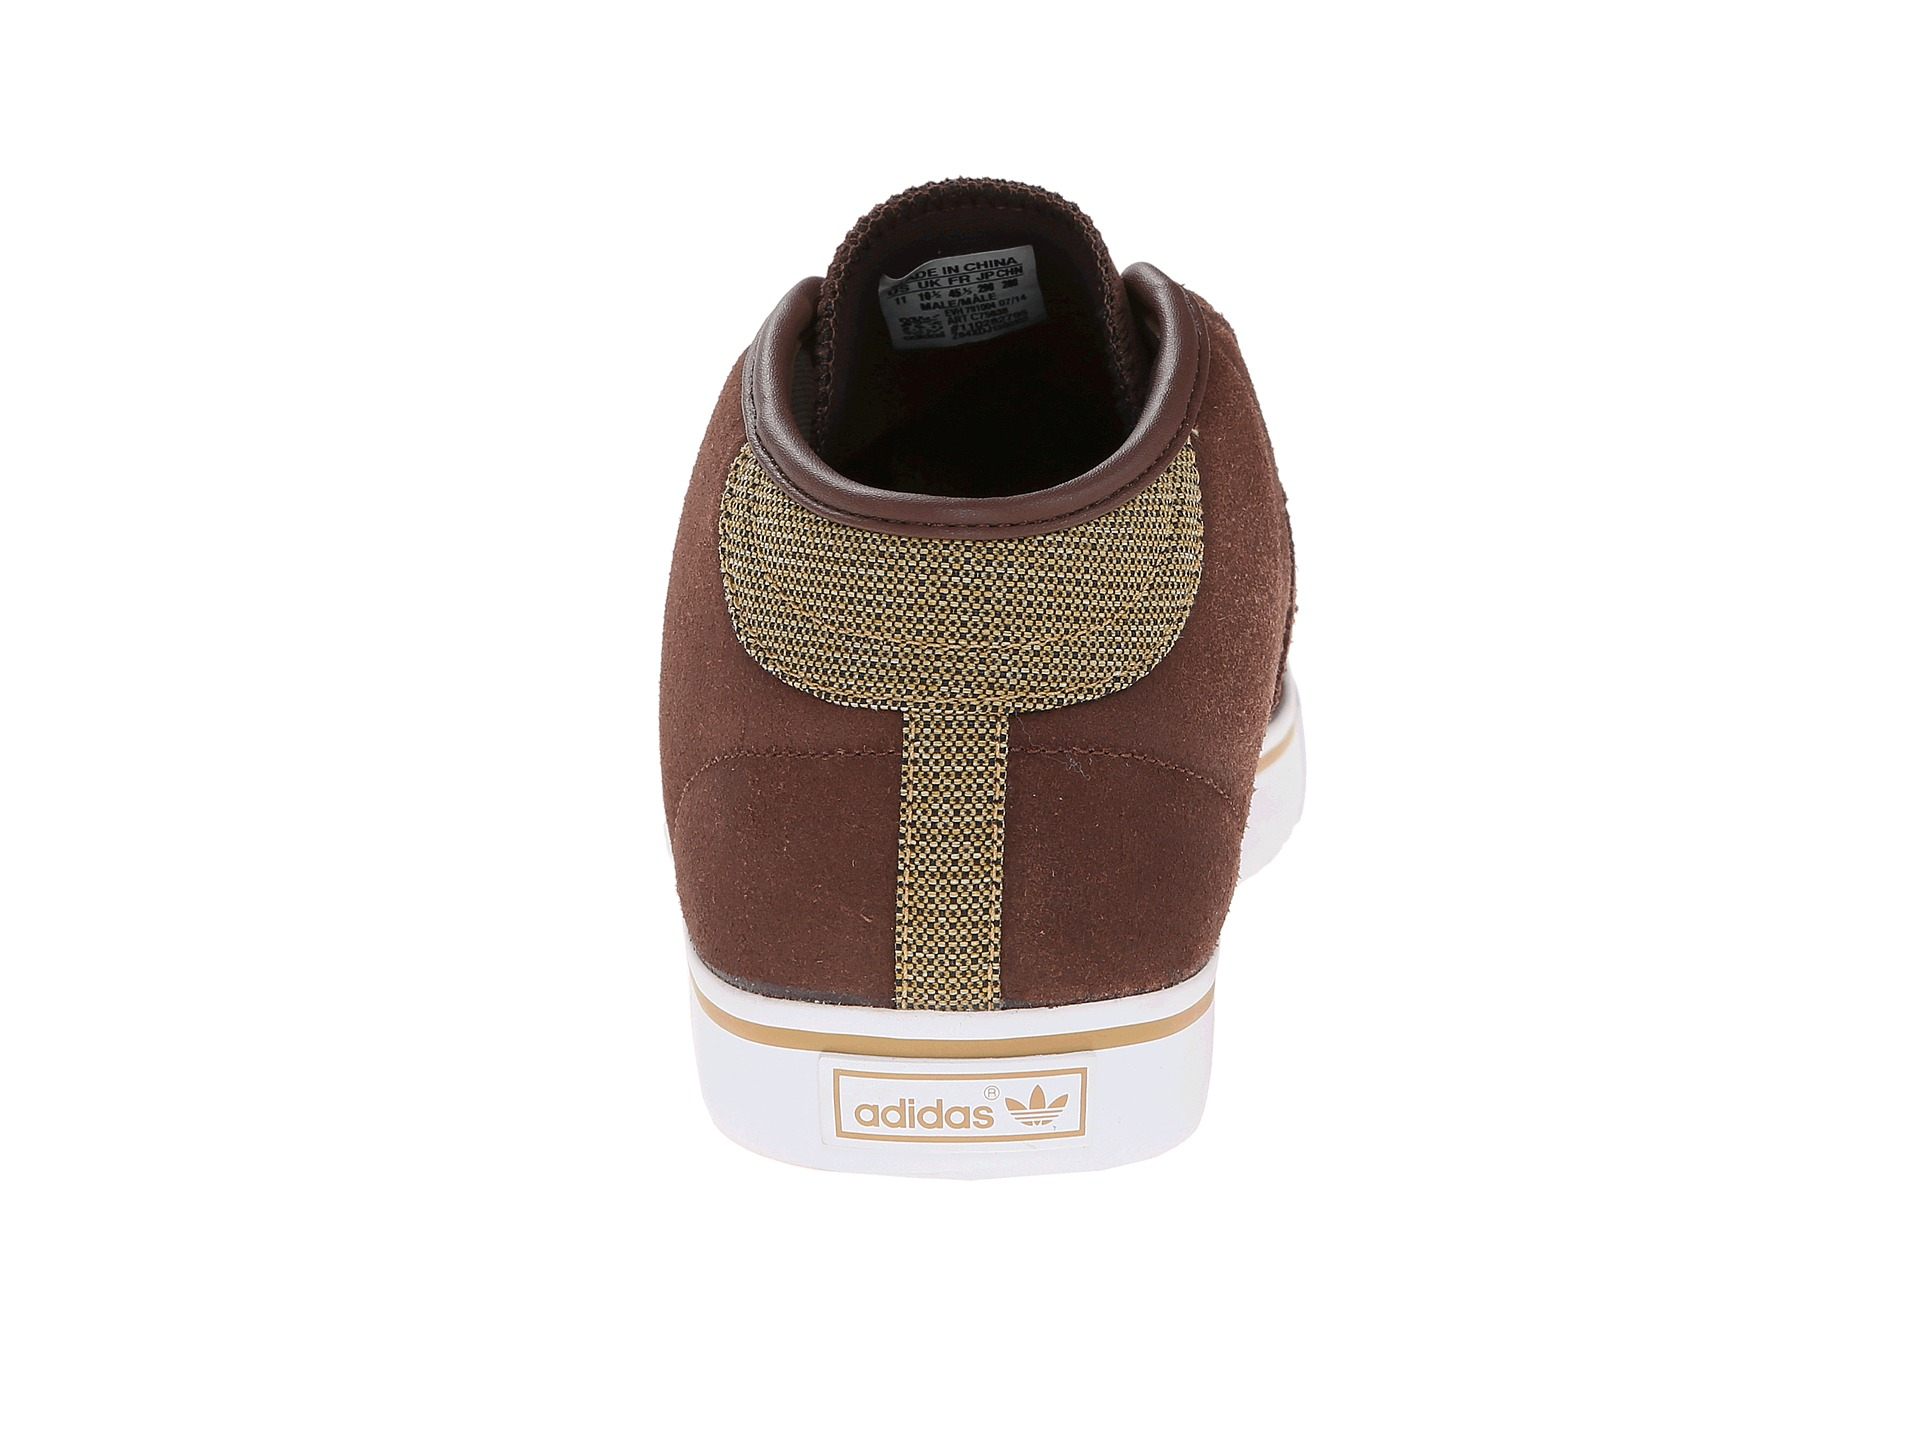 adidas Seeley Mid in Brown for Men - Lyst